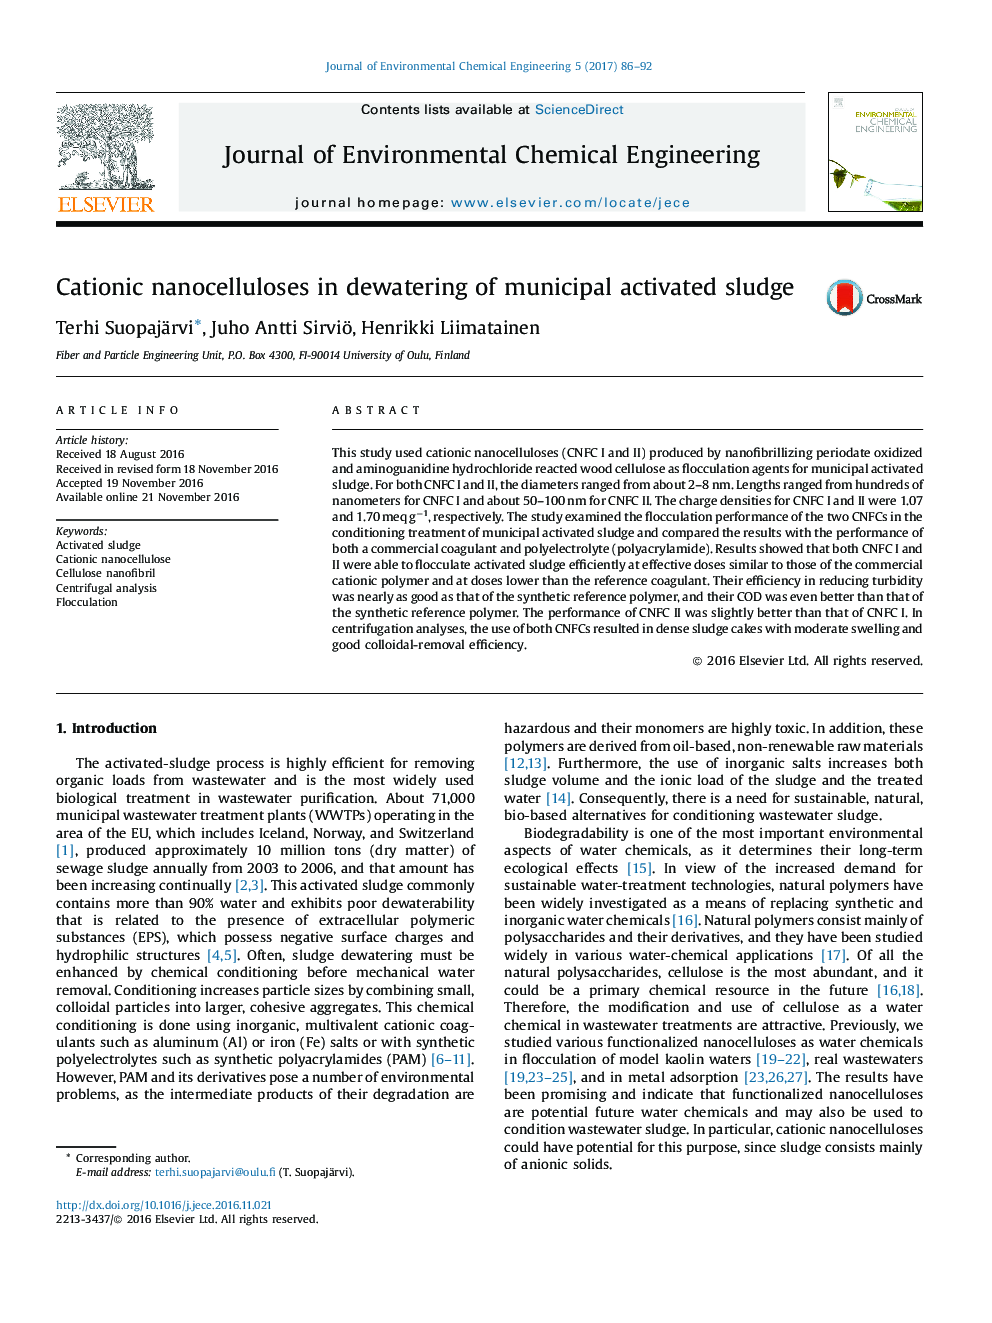 Cationic nanocelluloses in dewatering of municipal activated sludge